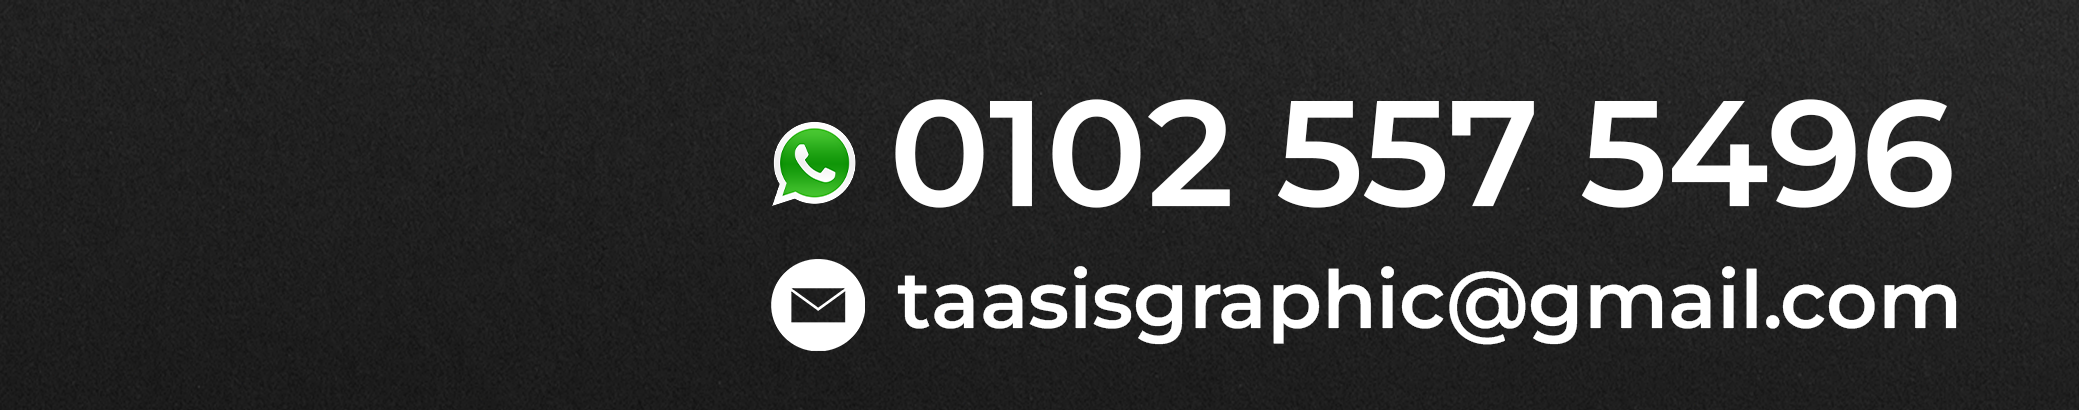 Taasis Graphic's profile banner